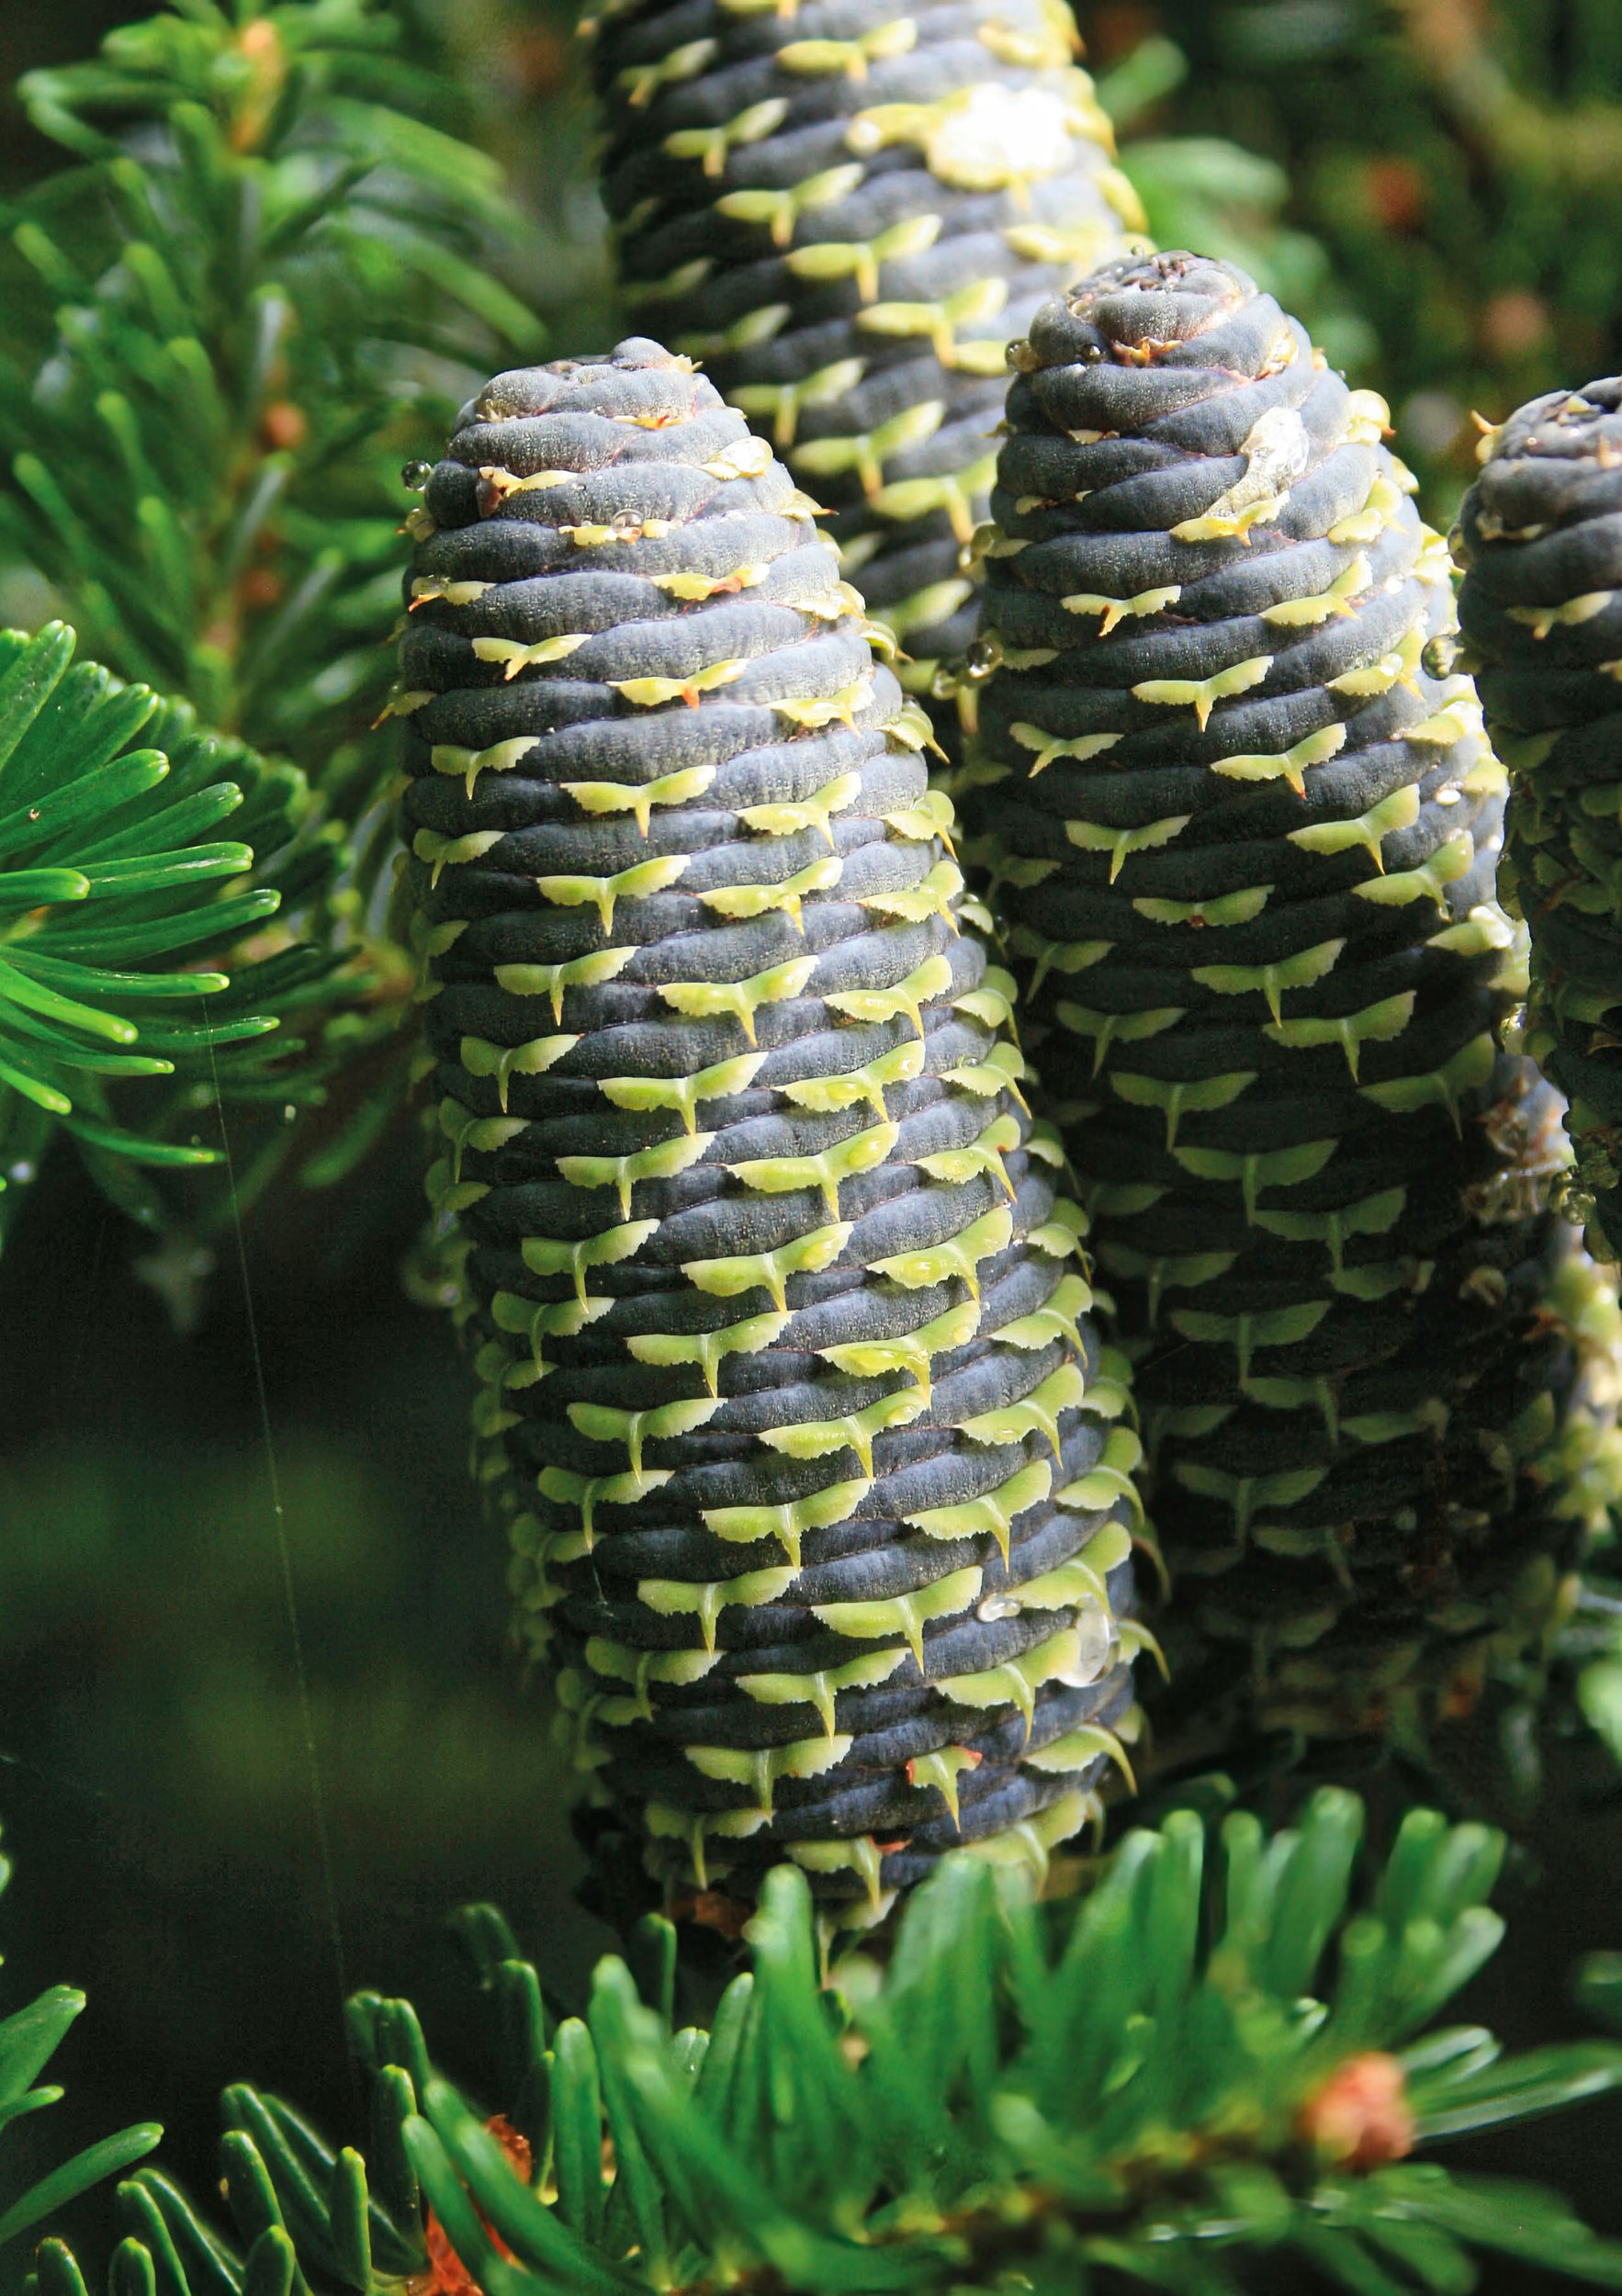 The beautiful and highly detailed cones of Abies koreana